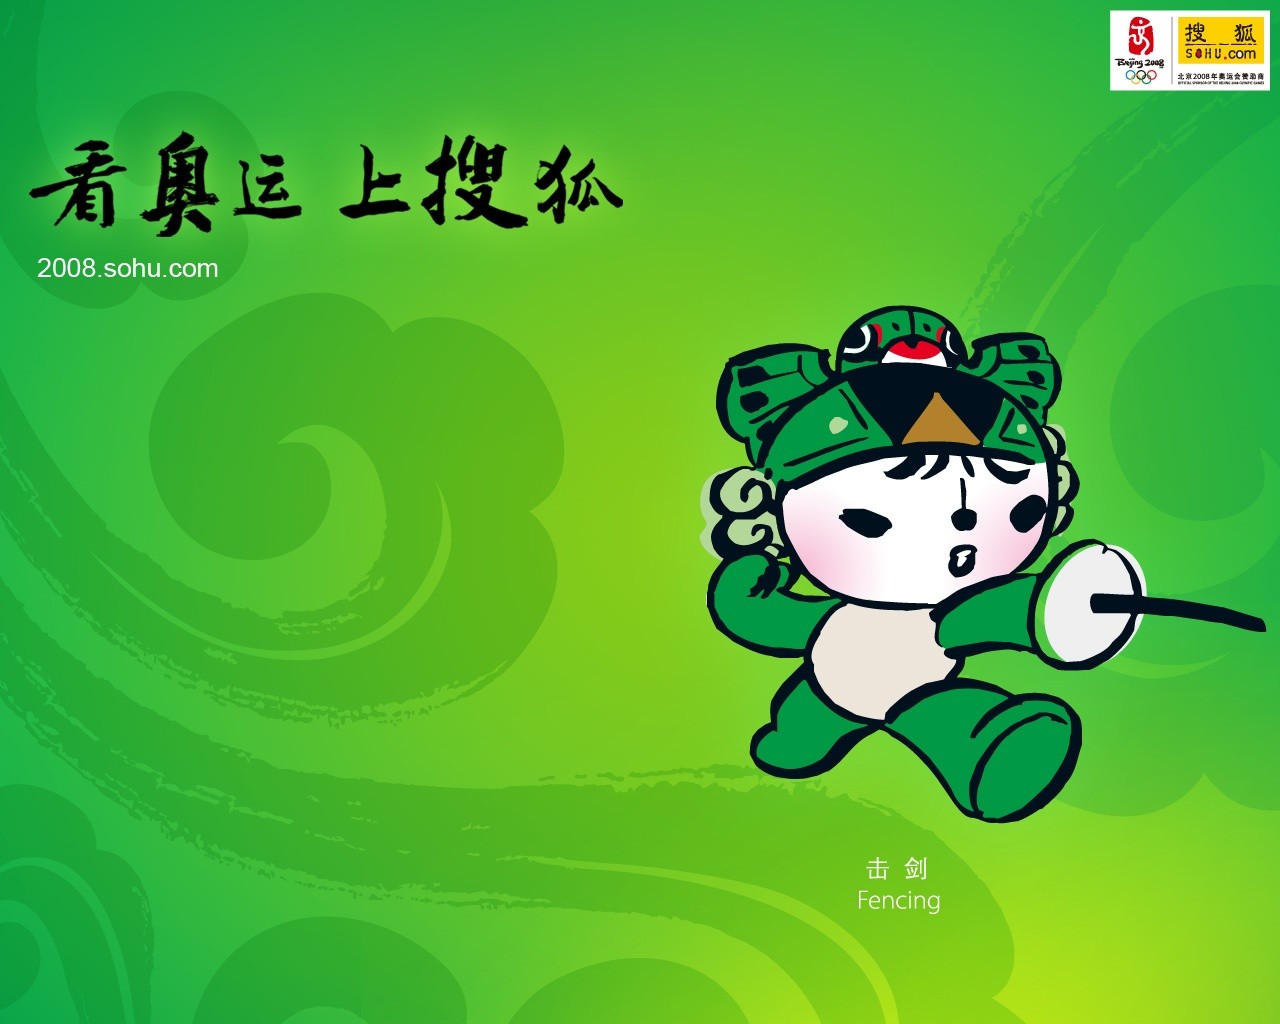 08 Olympic Games Fuwa Wallpapers #8 - 1280x1024